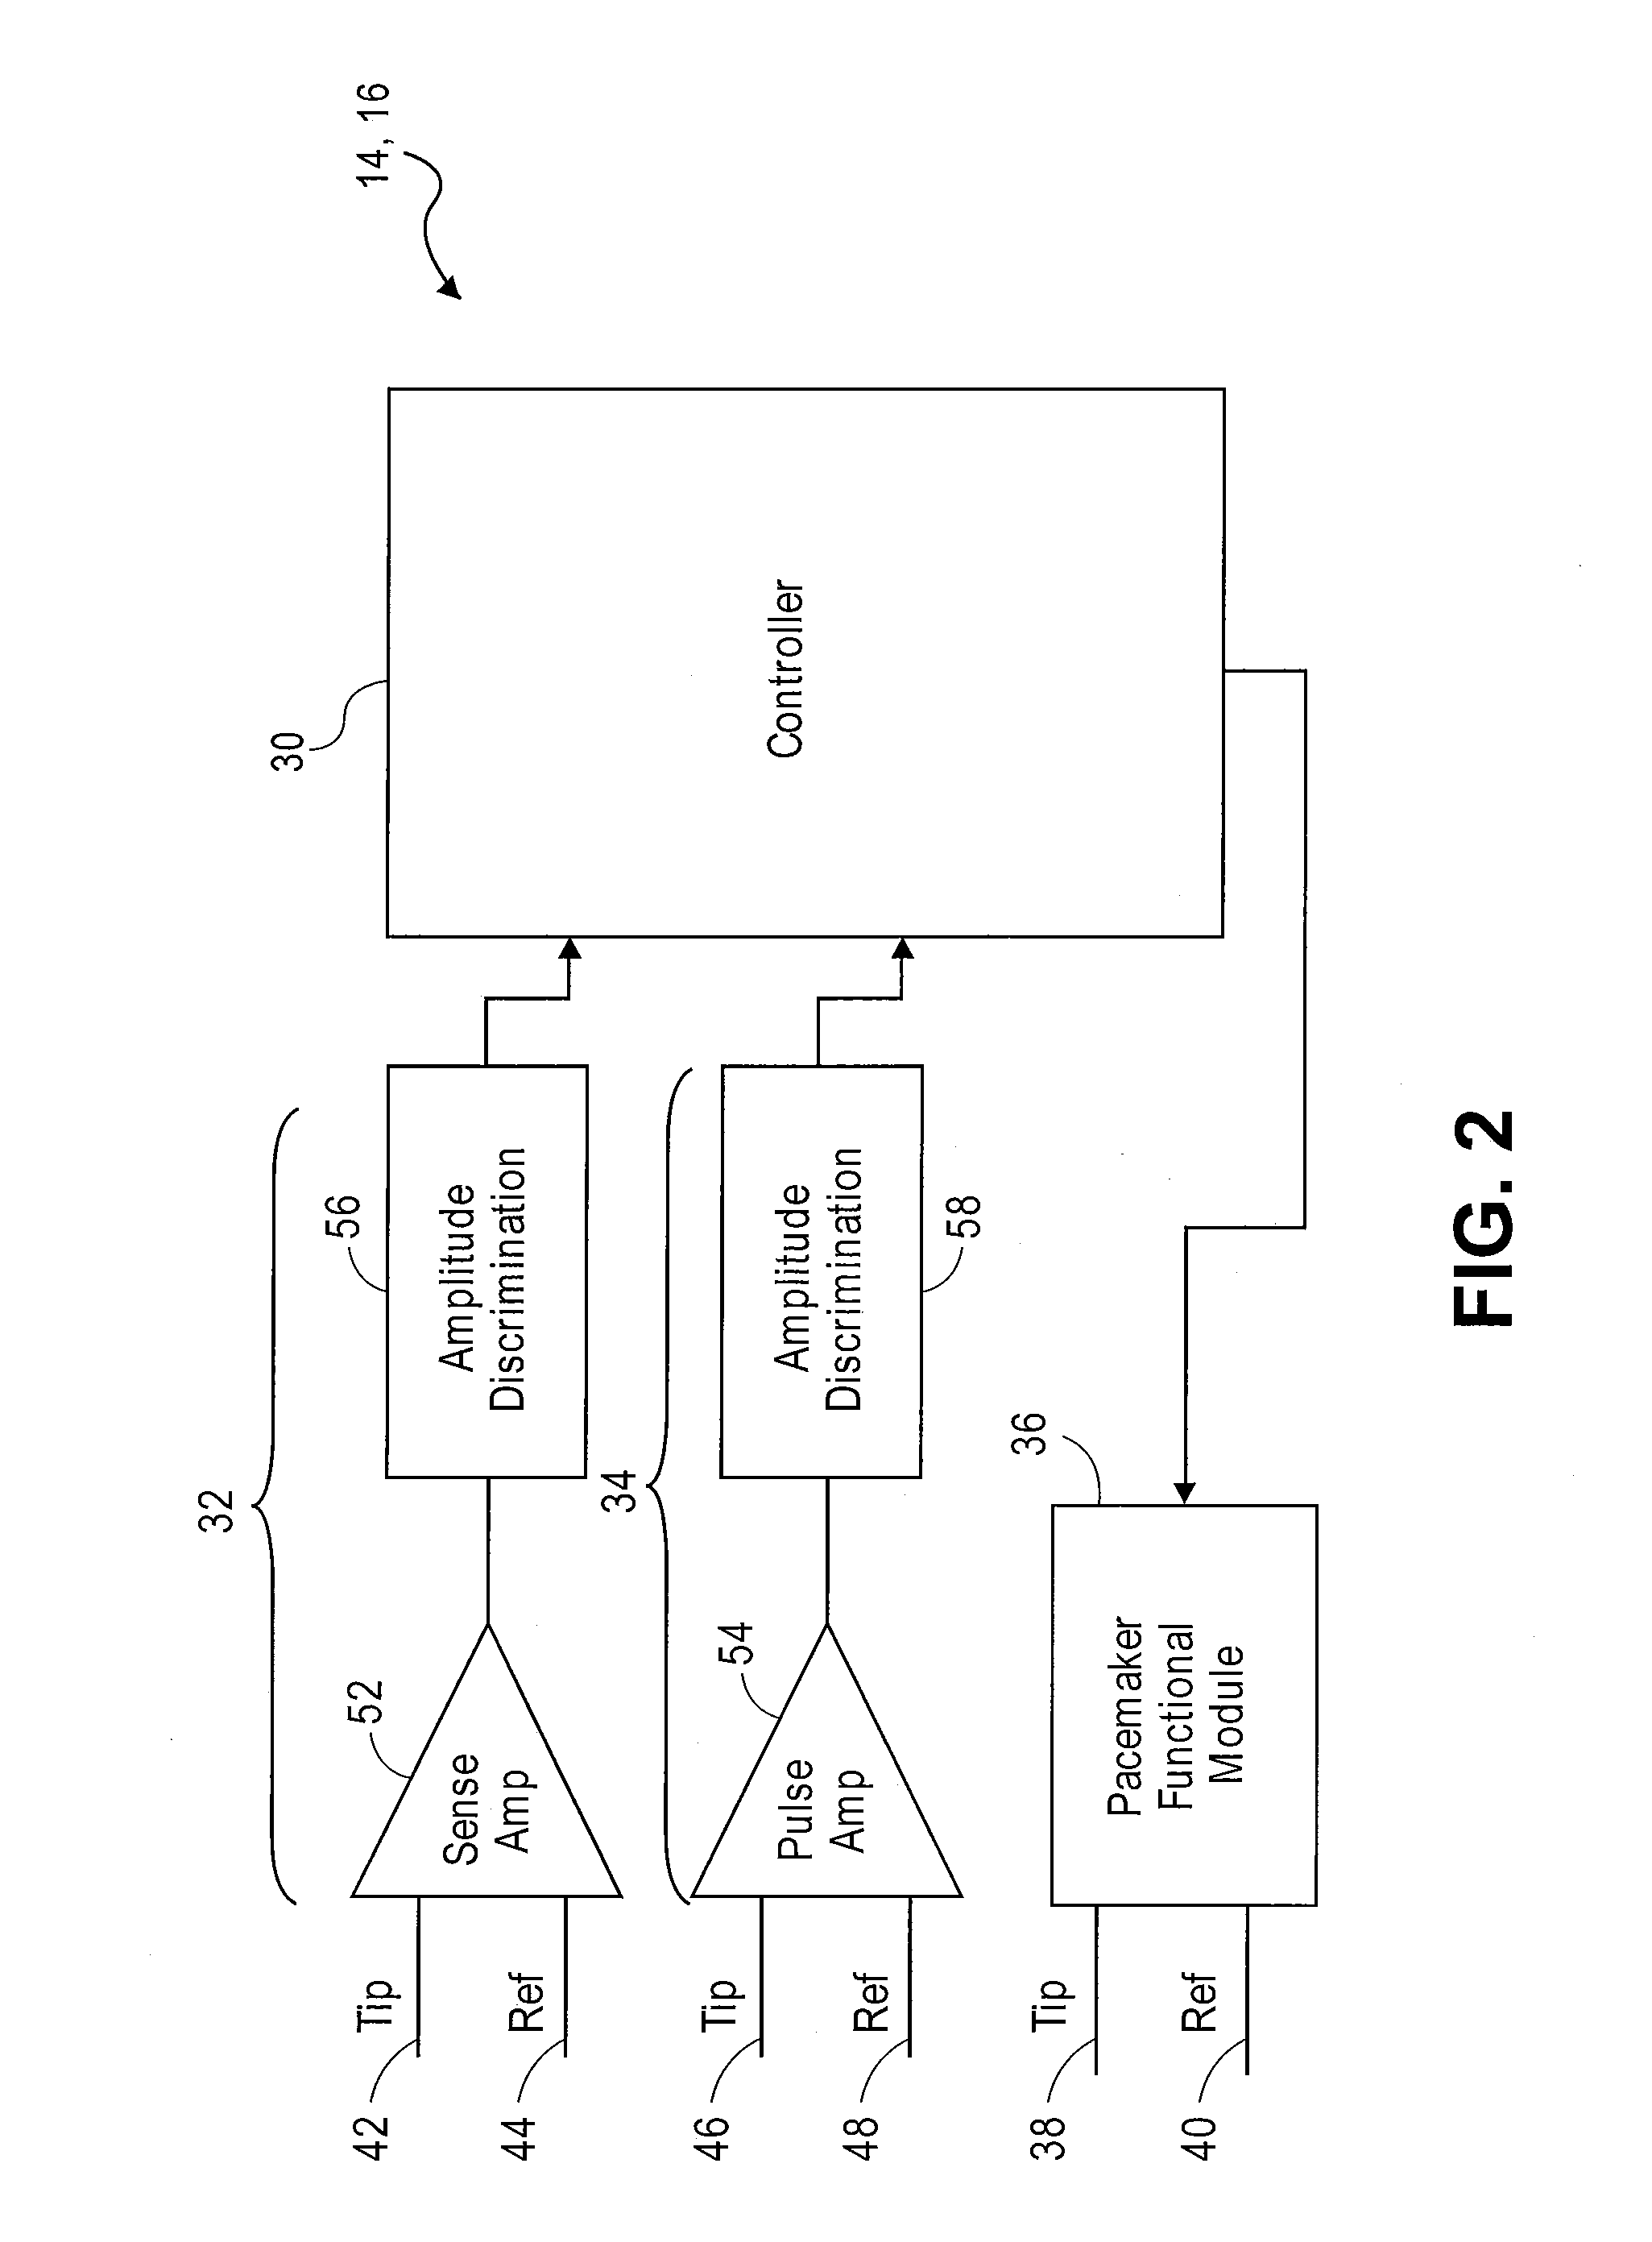 Method and system for tracking events of interest between leadless and subcutaneous implantable cardioverter devices